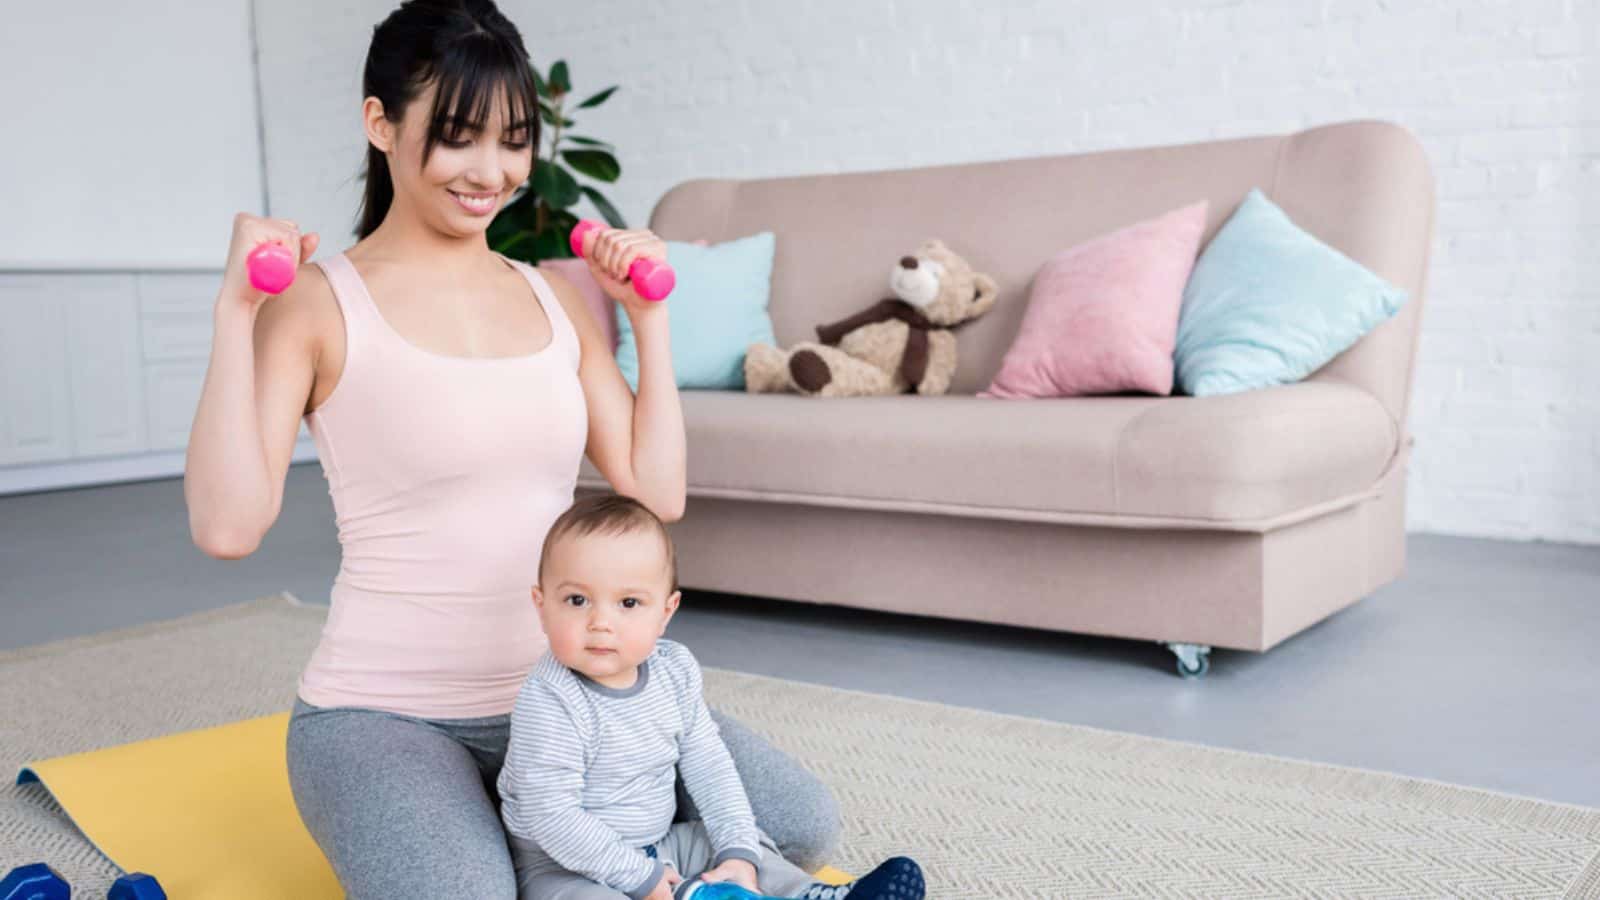 Young smiling mother working out on yoga mat with her little baby